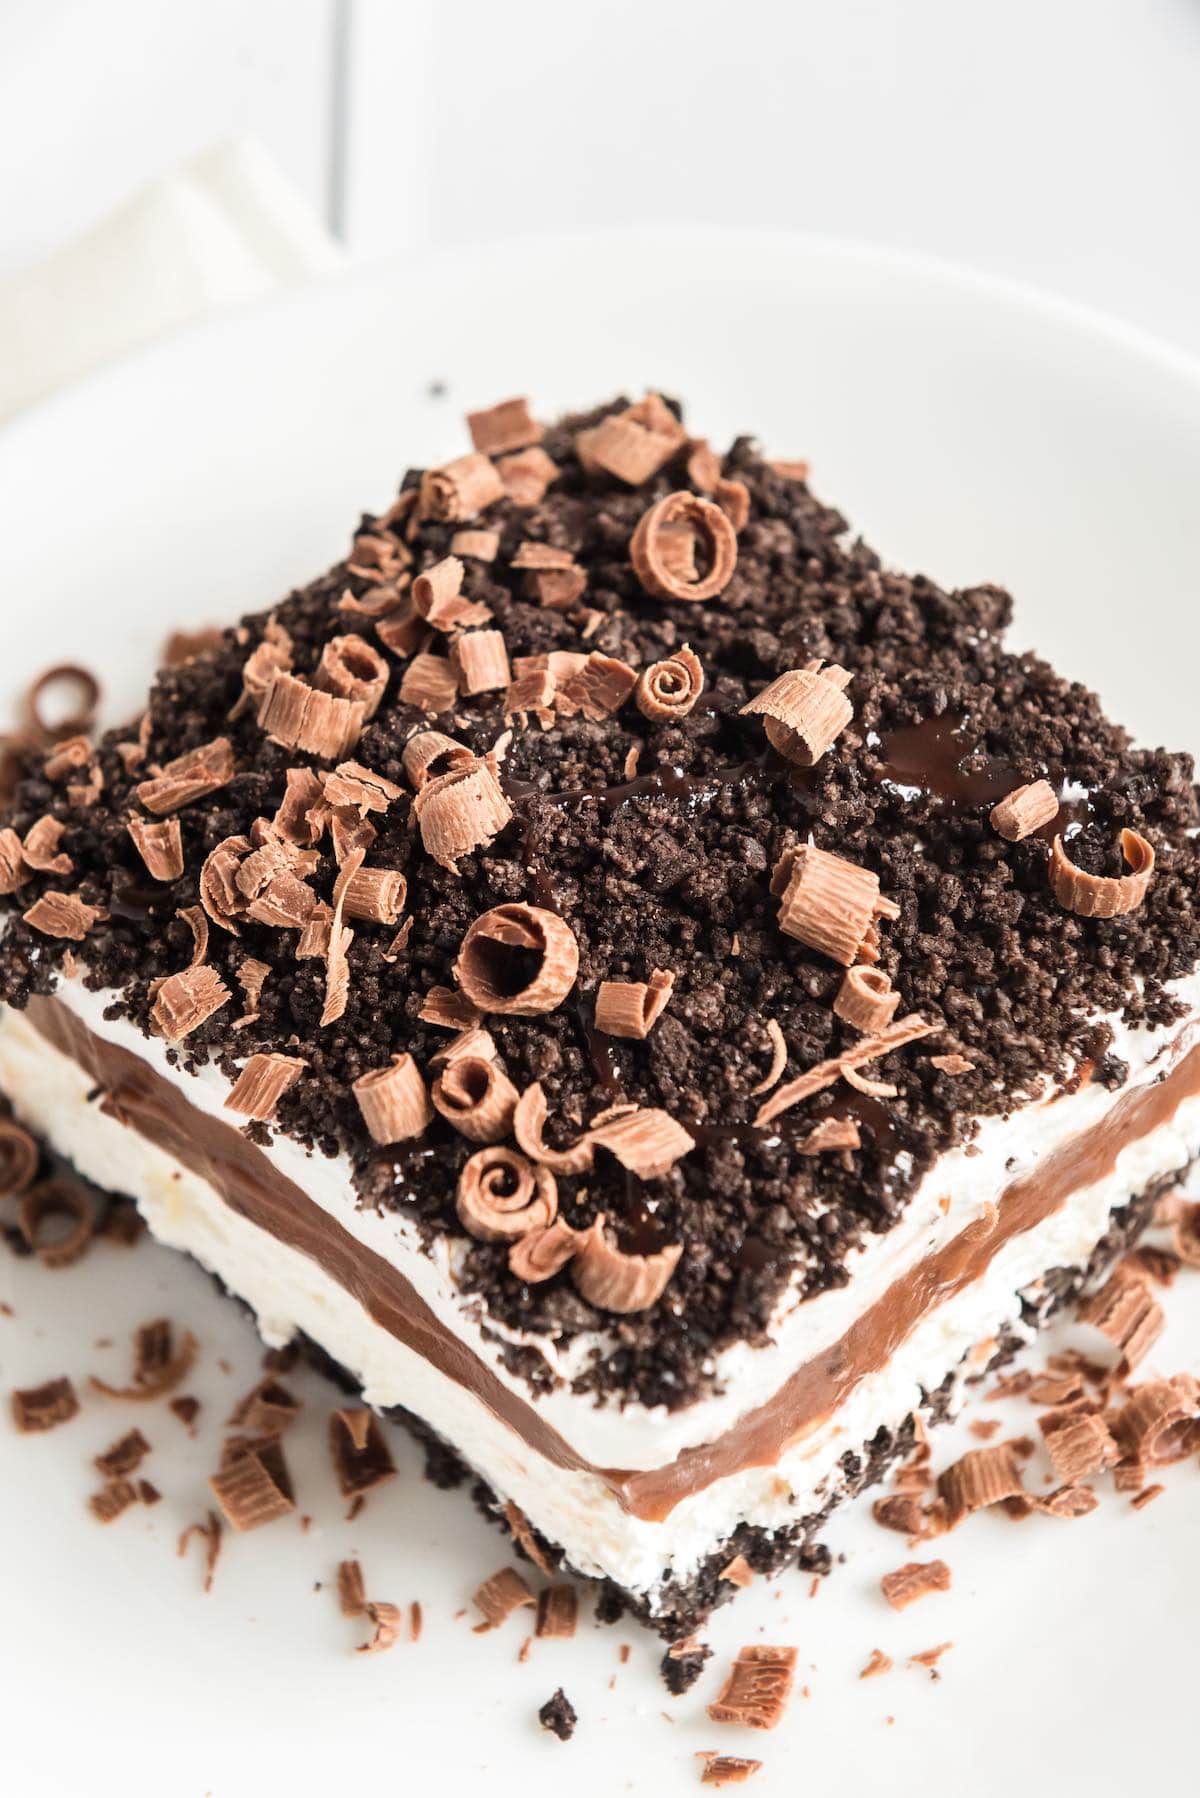 a slice of chocolate lasagna with chocolate shavings on top.